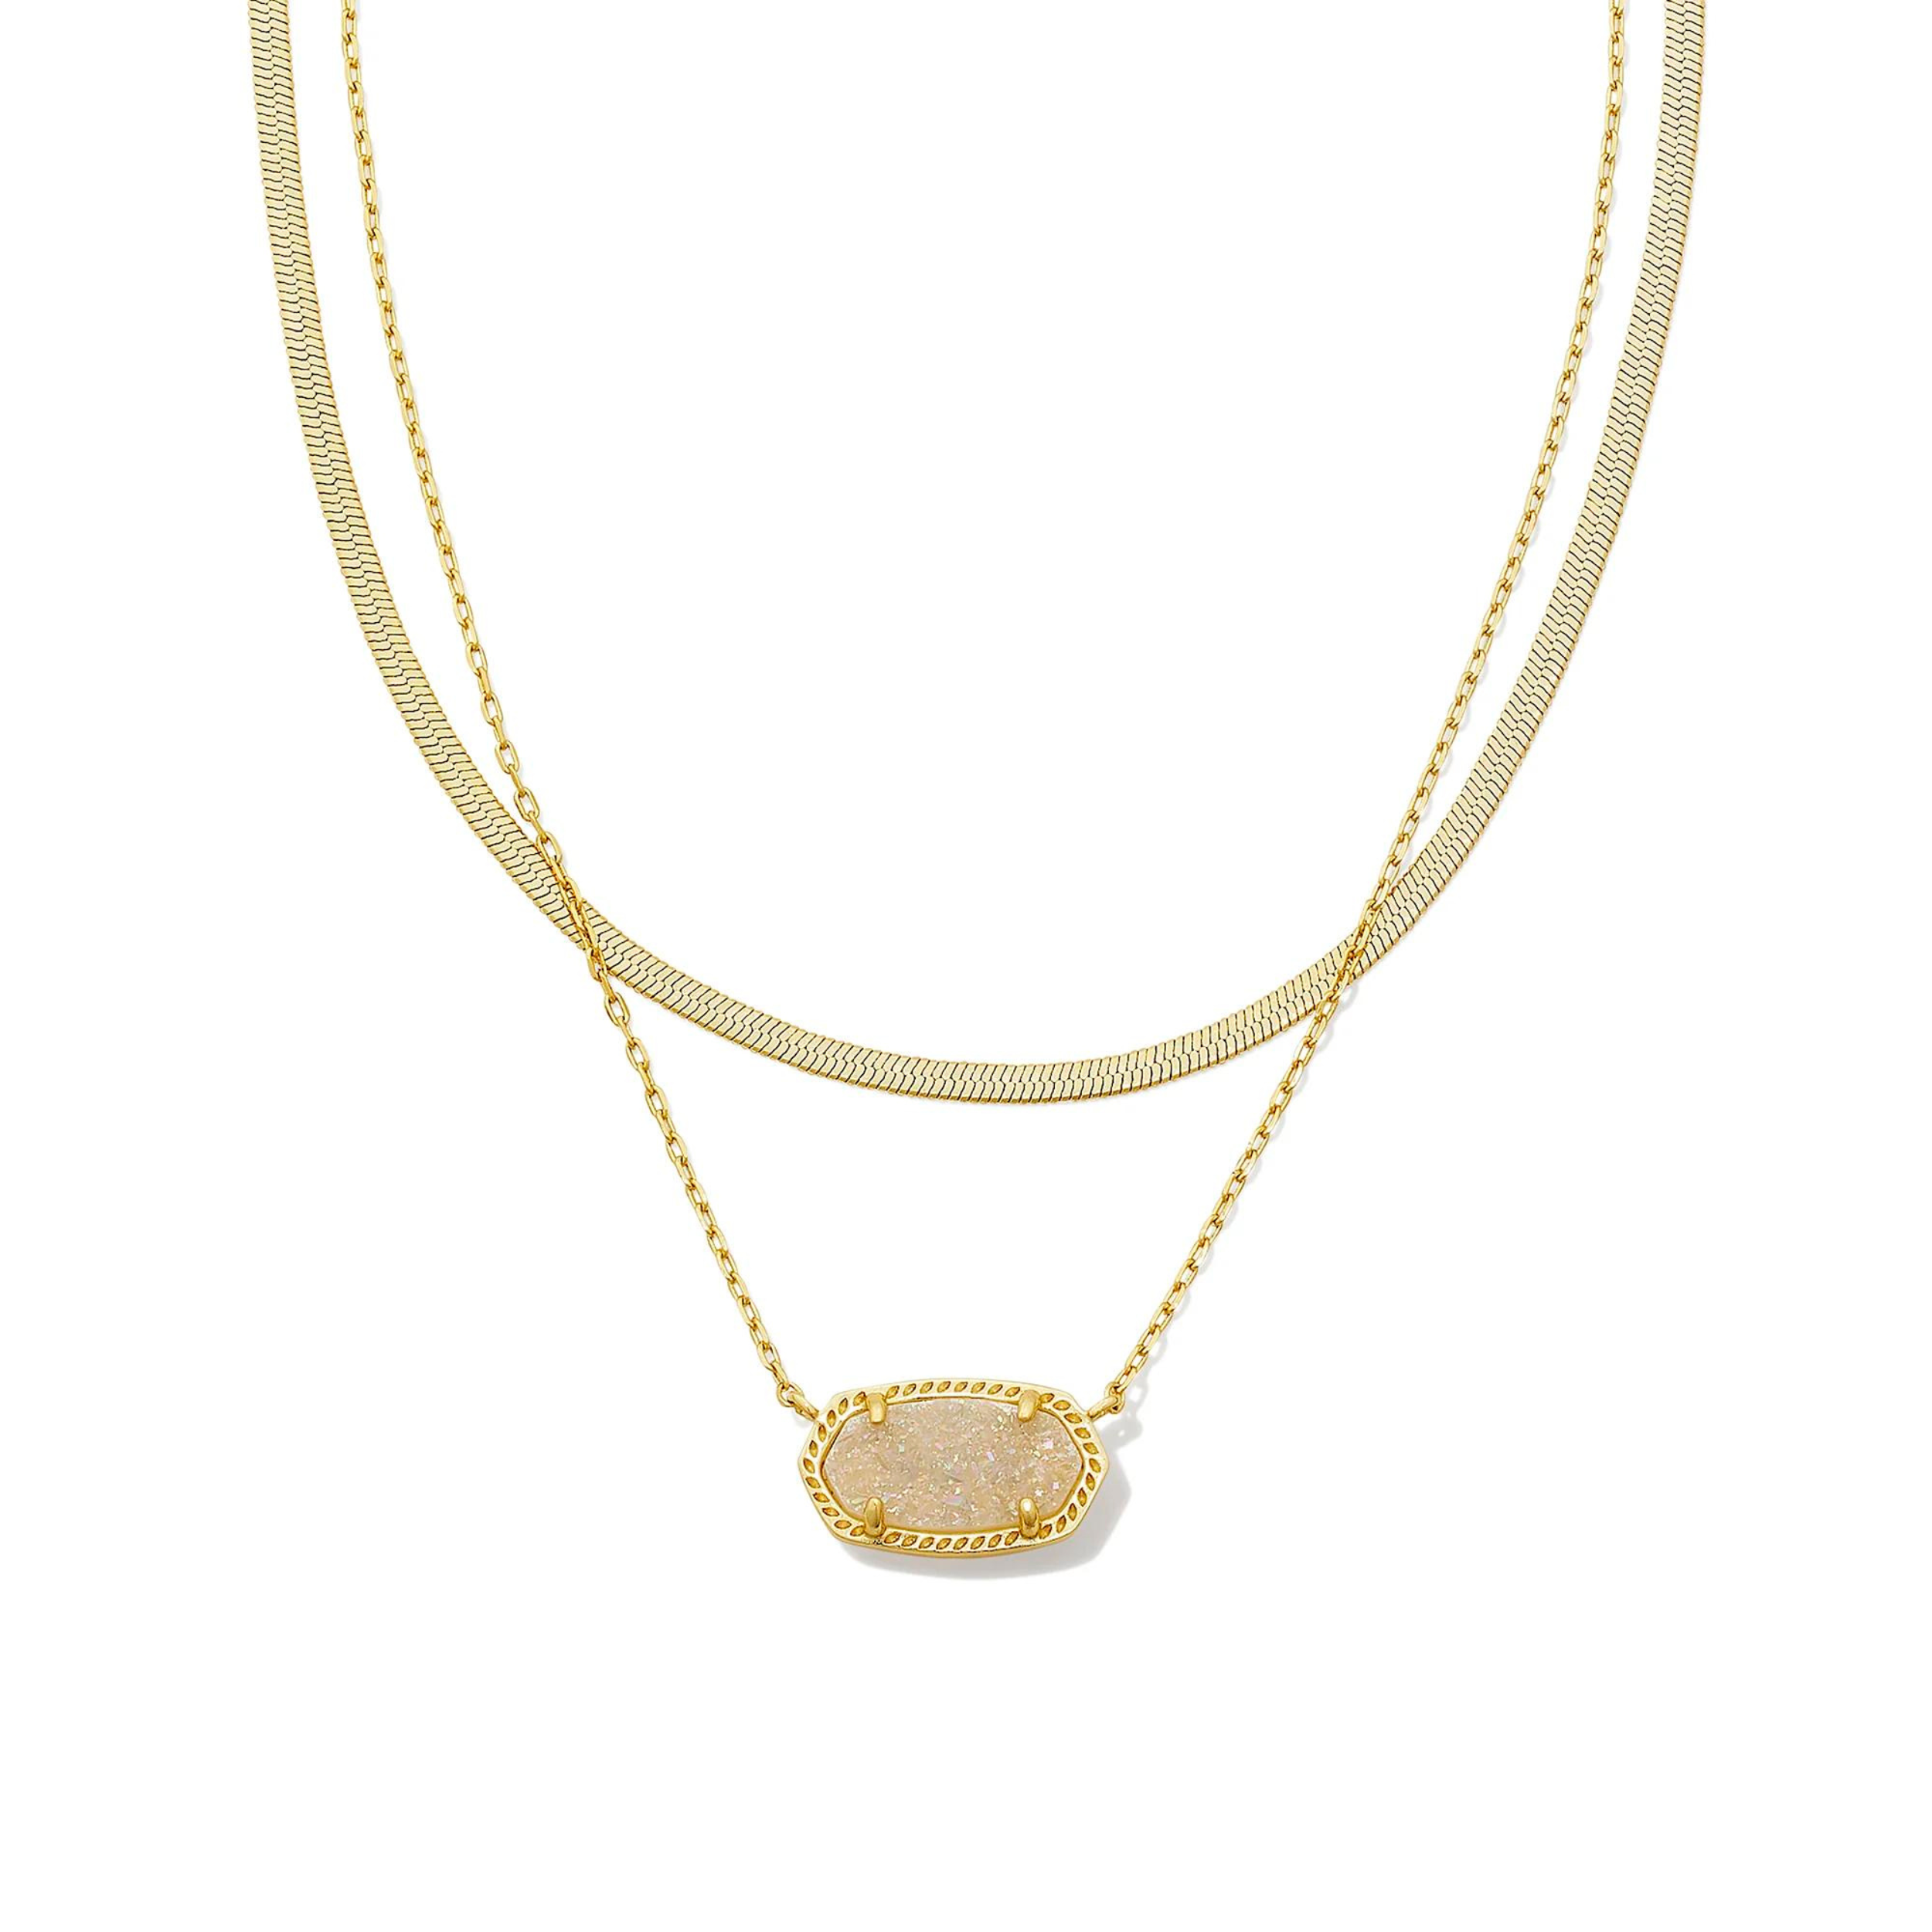 Pictured is a two strand chain necklace with an oval iridescent drusy pendant. This necklace is pictured on a white background.    